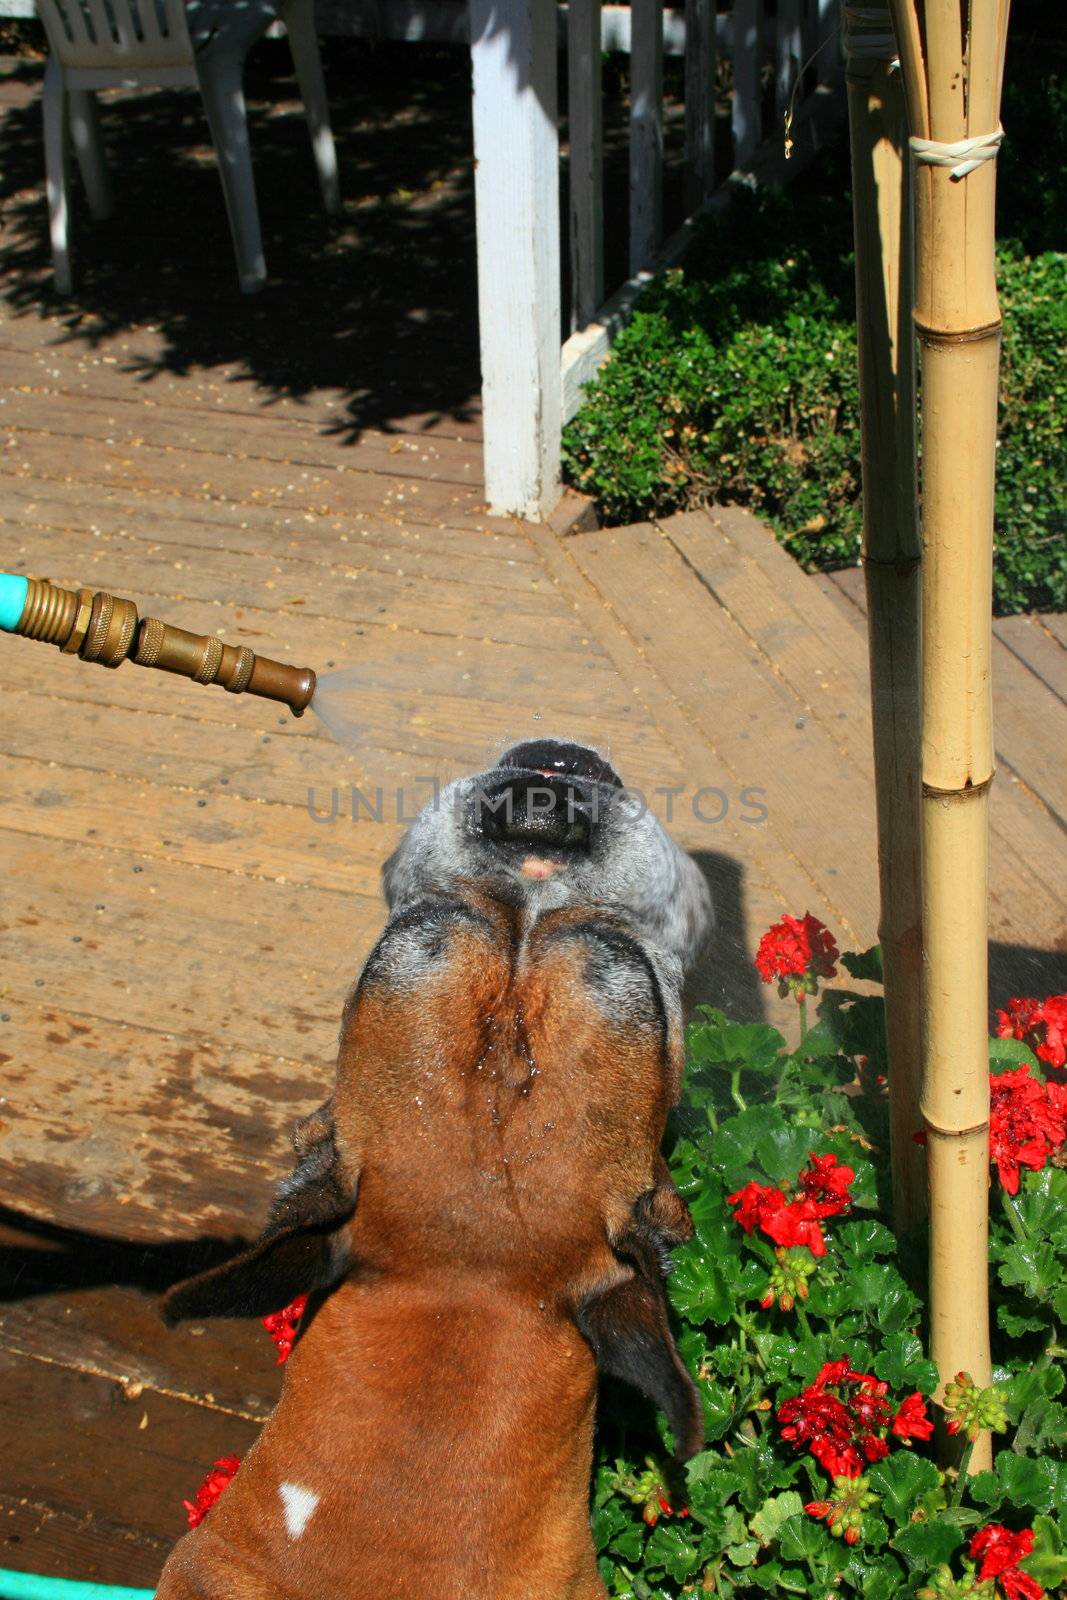 Boxer dog getting sparayed with a water hose outdoors.
